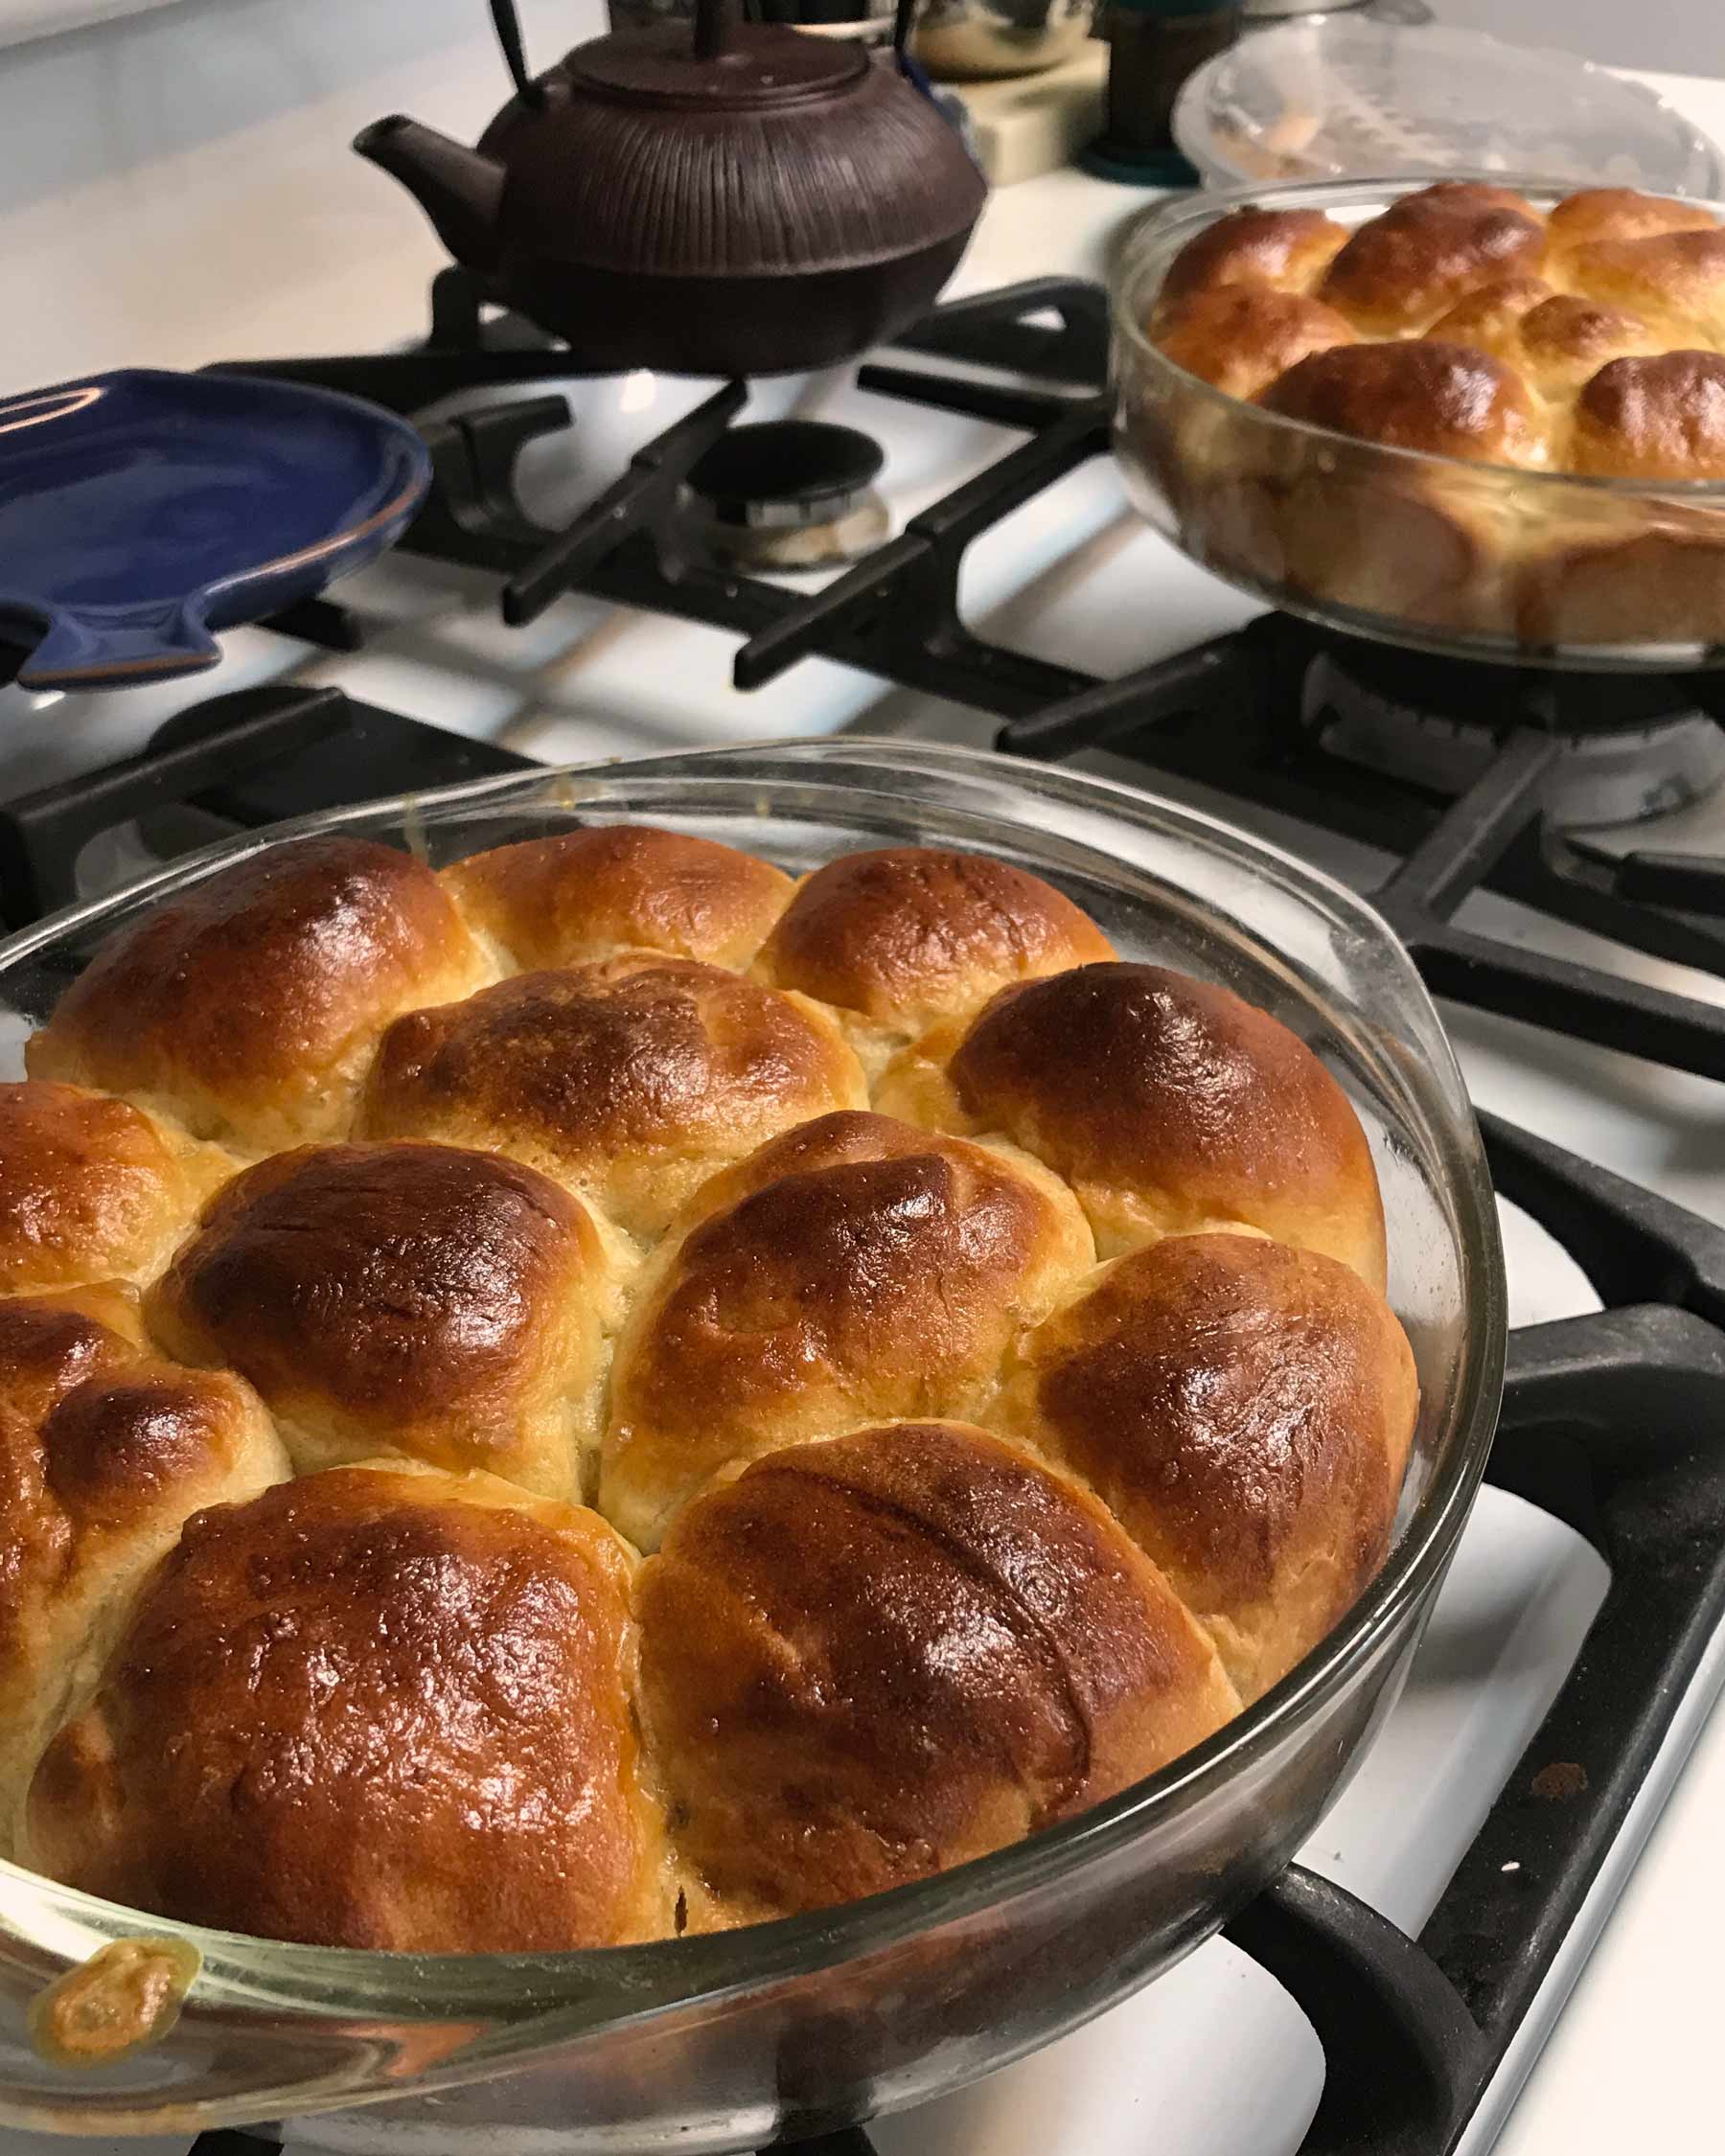 Pans of dinner rolls rest on top of stove.